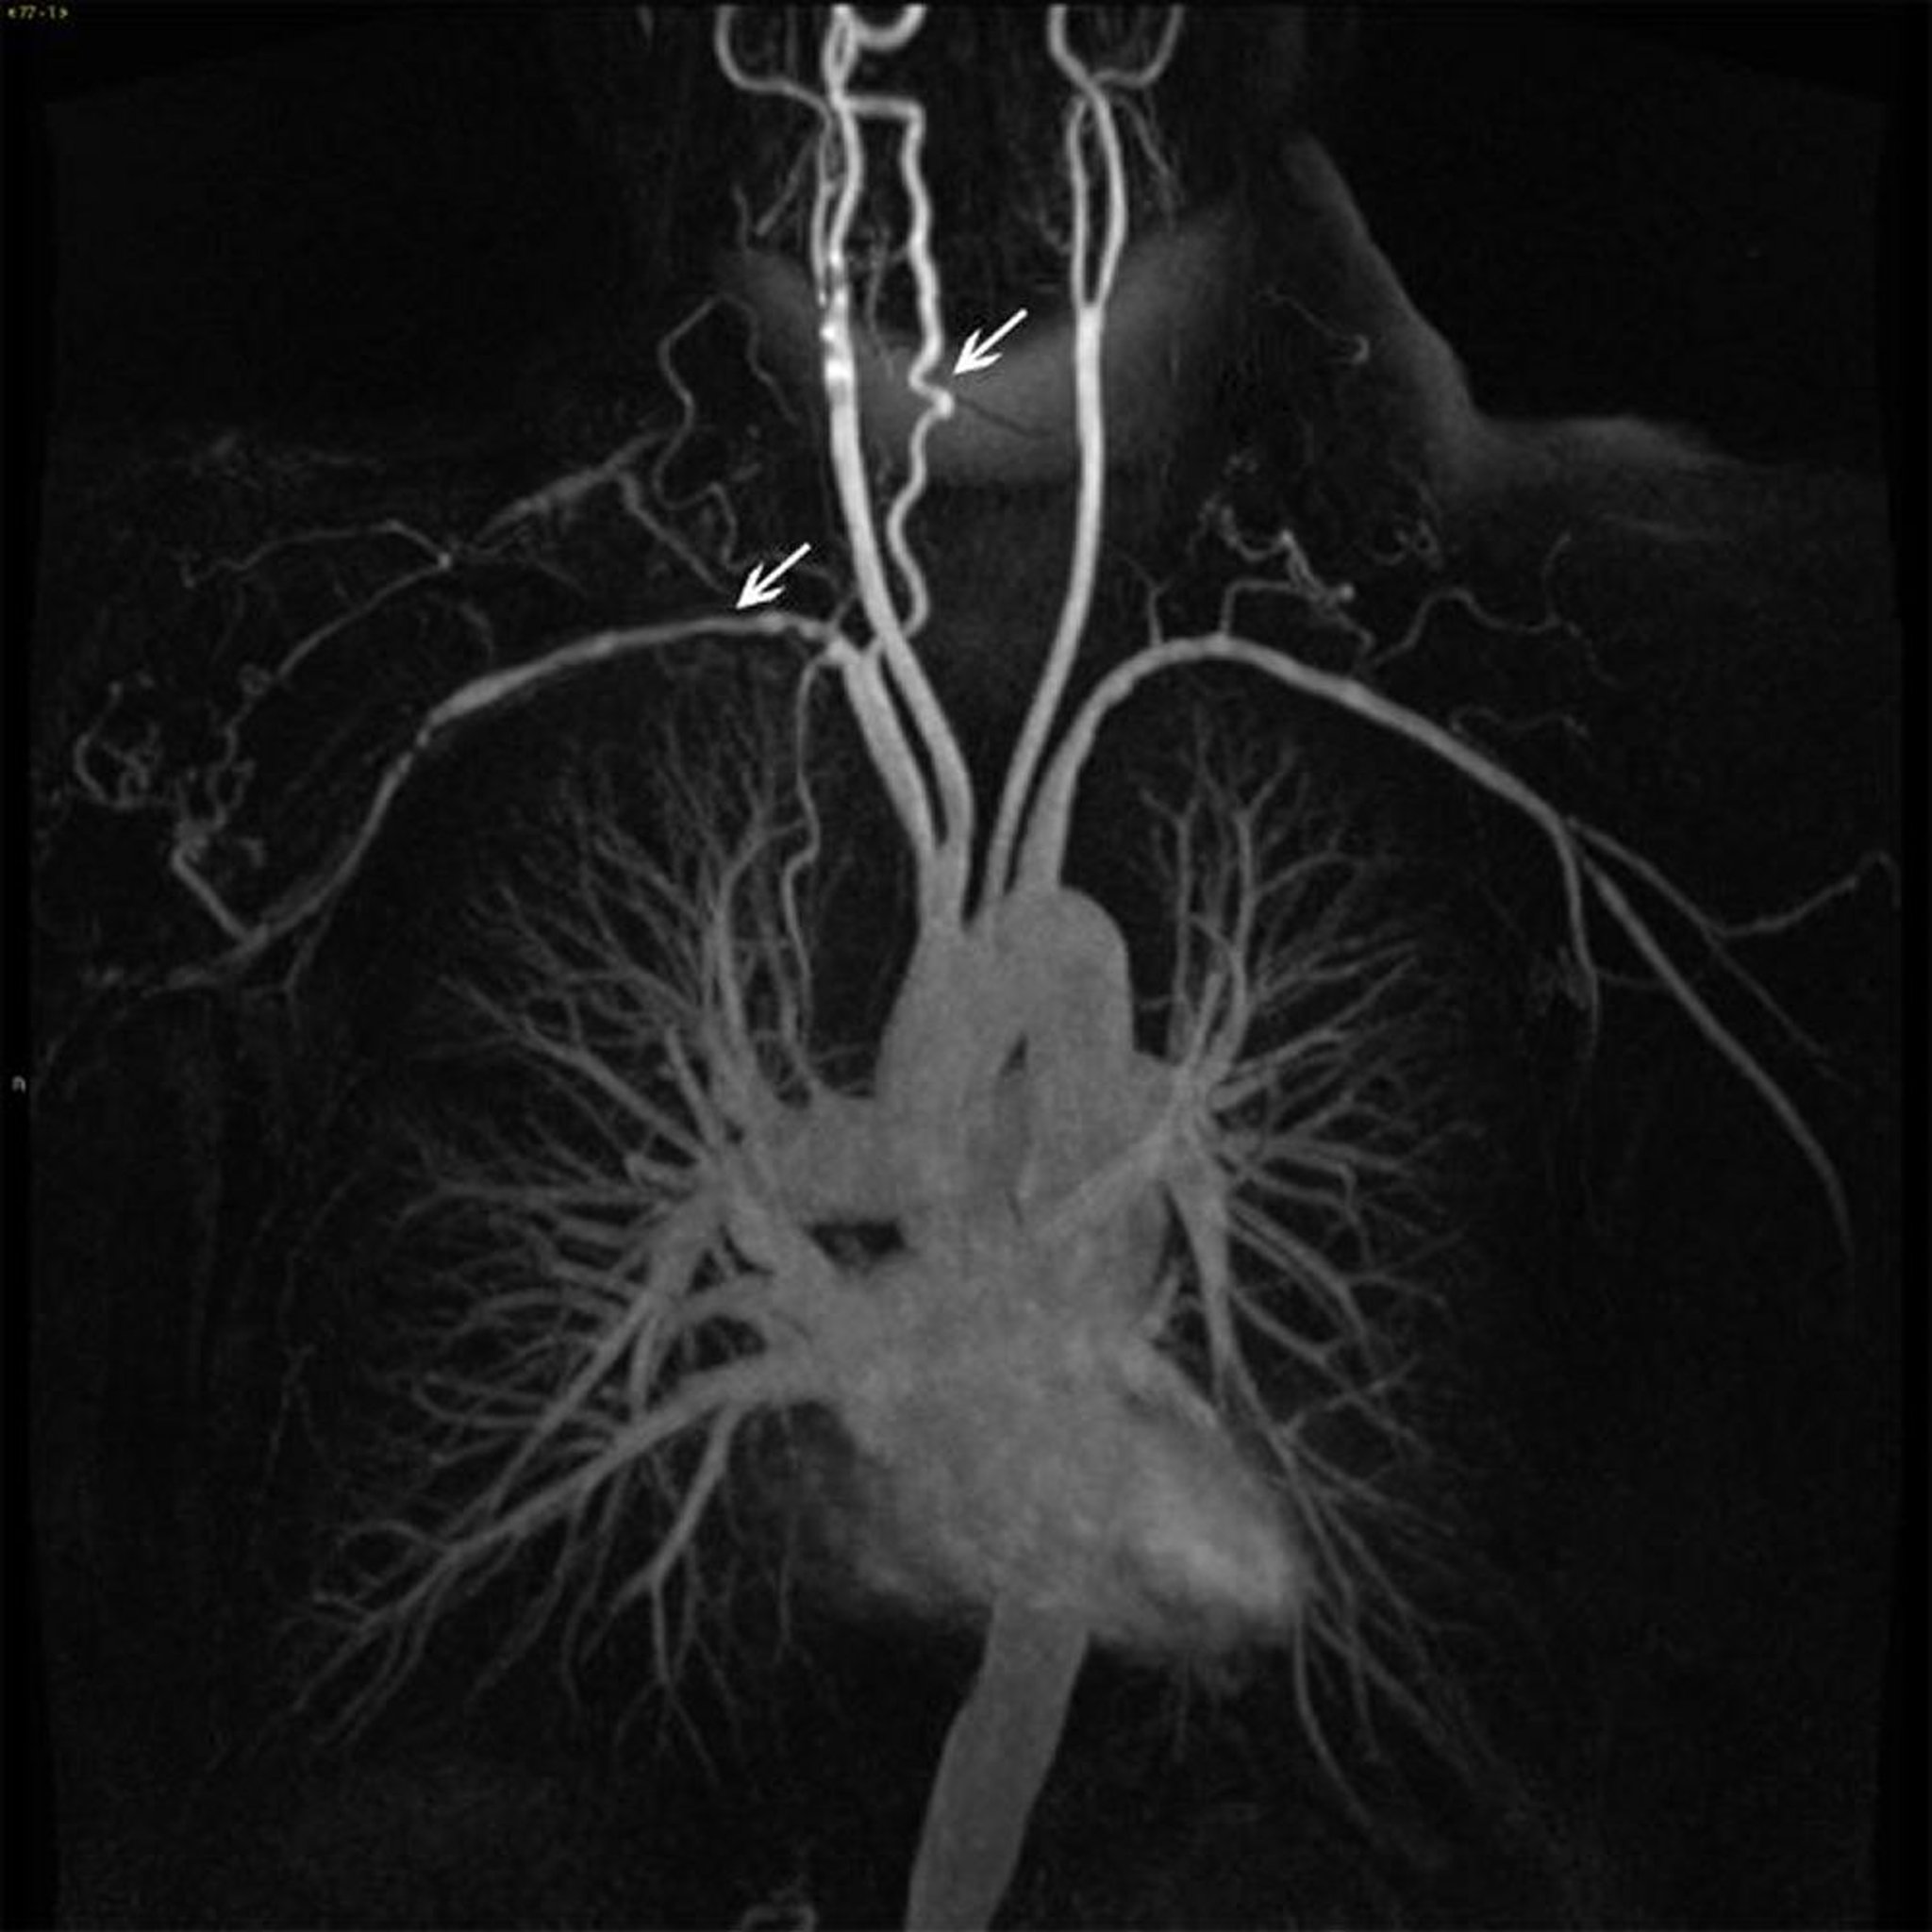 Branches of Ascending Thoracic Aorta in a Patient with Takayasu Arteritis